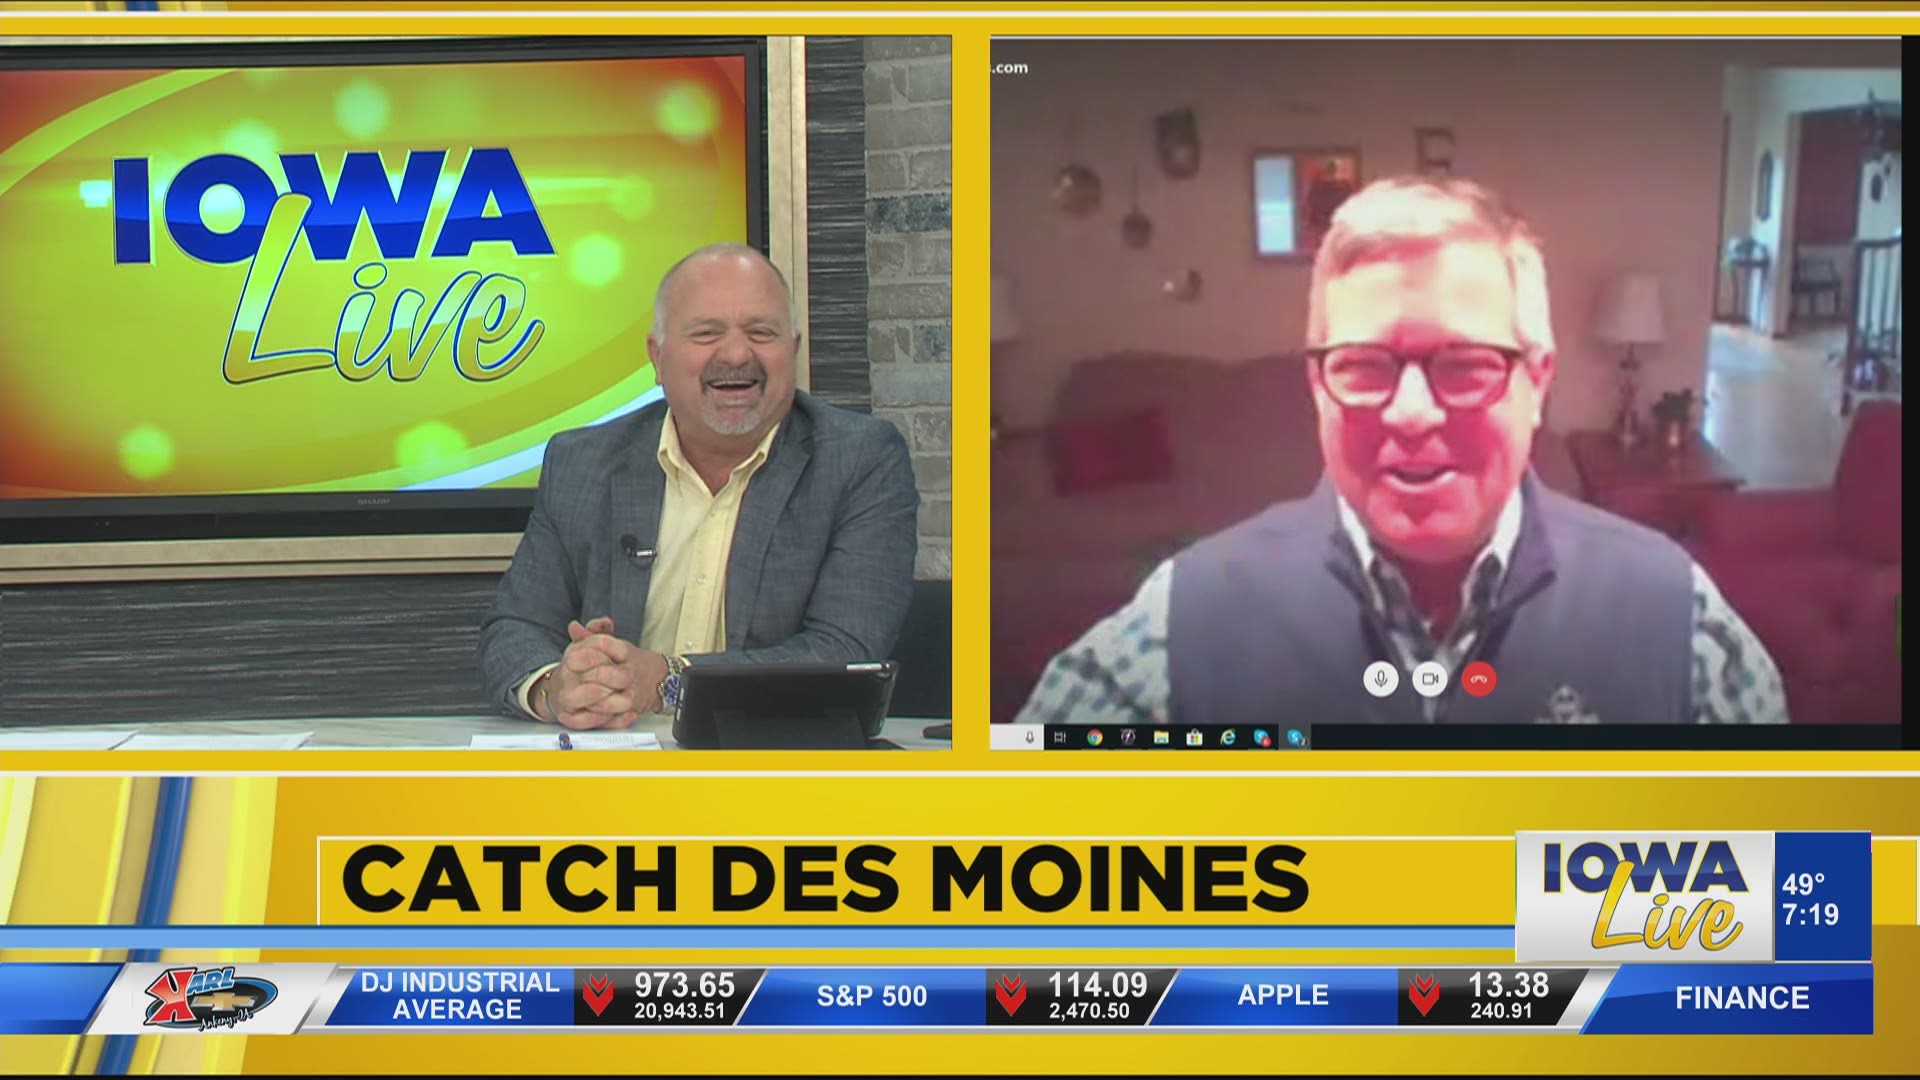 Catch Des Moines has many resources/initiatives in the works to support the local small business community